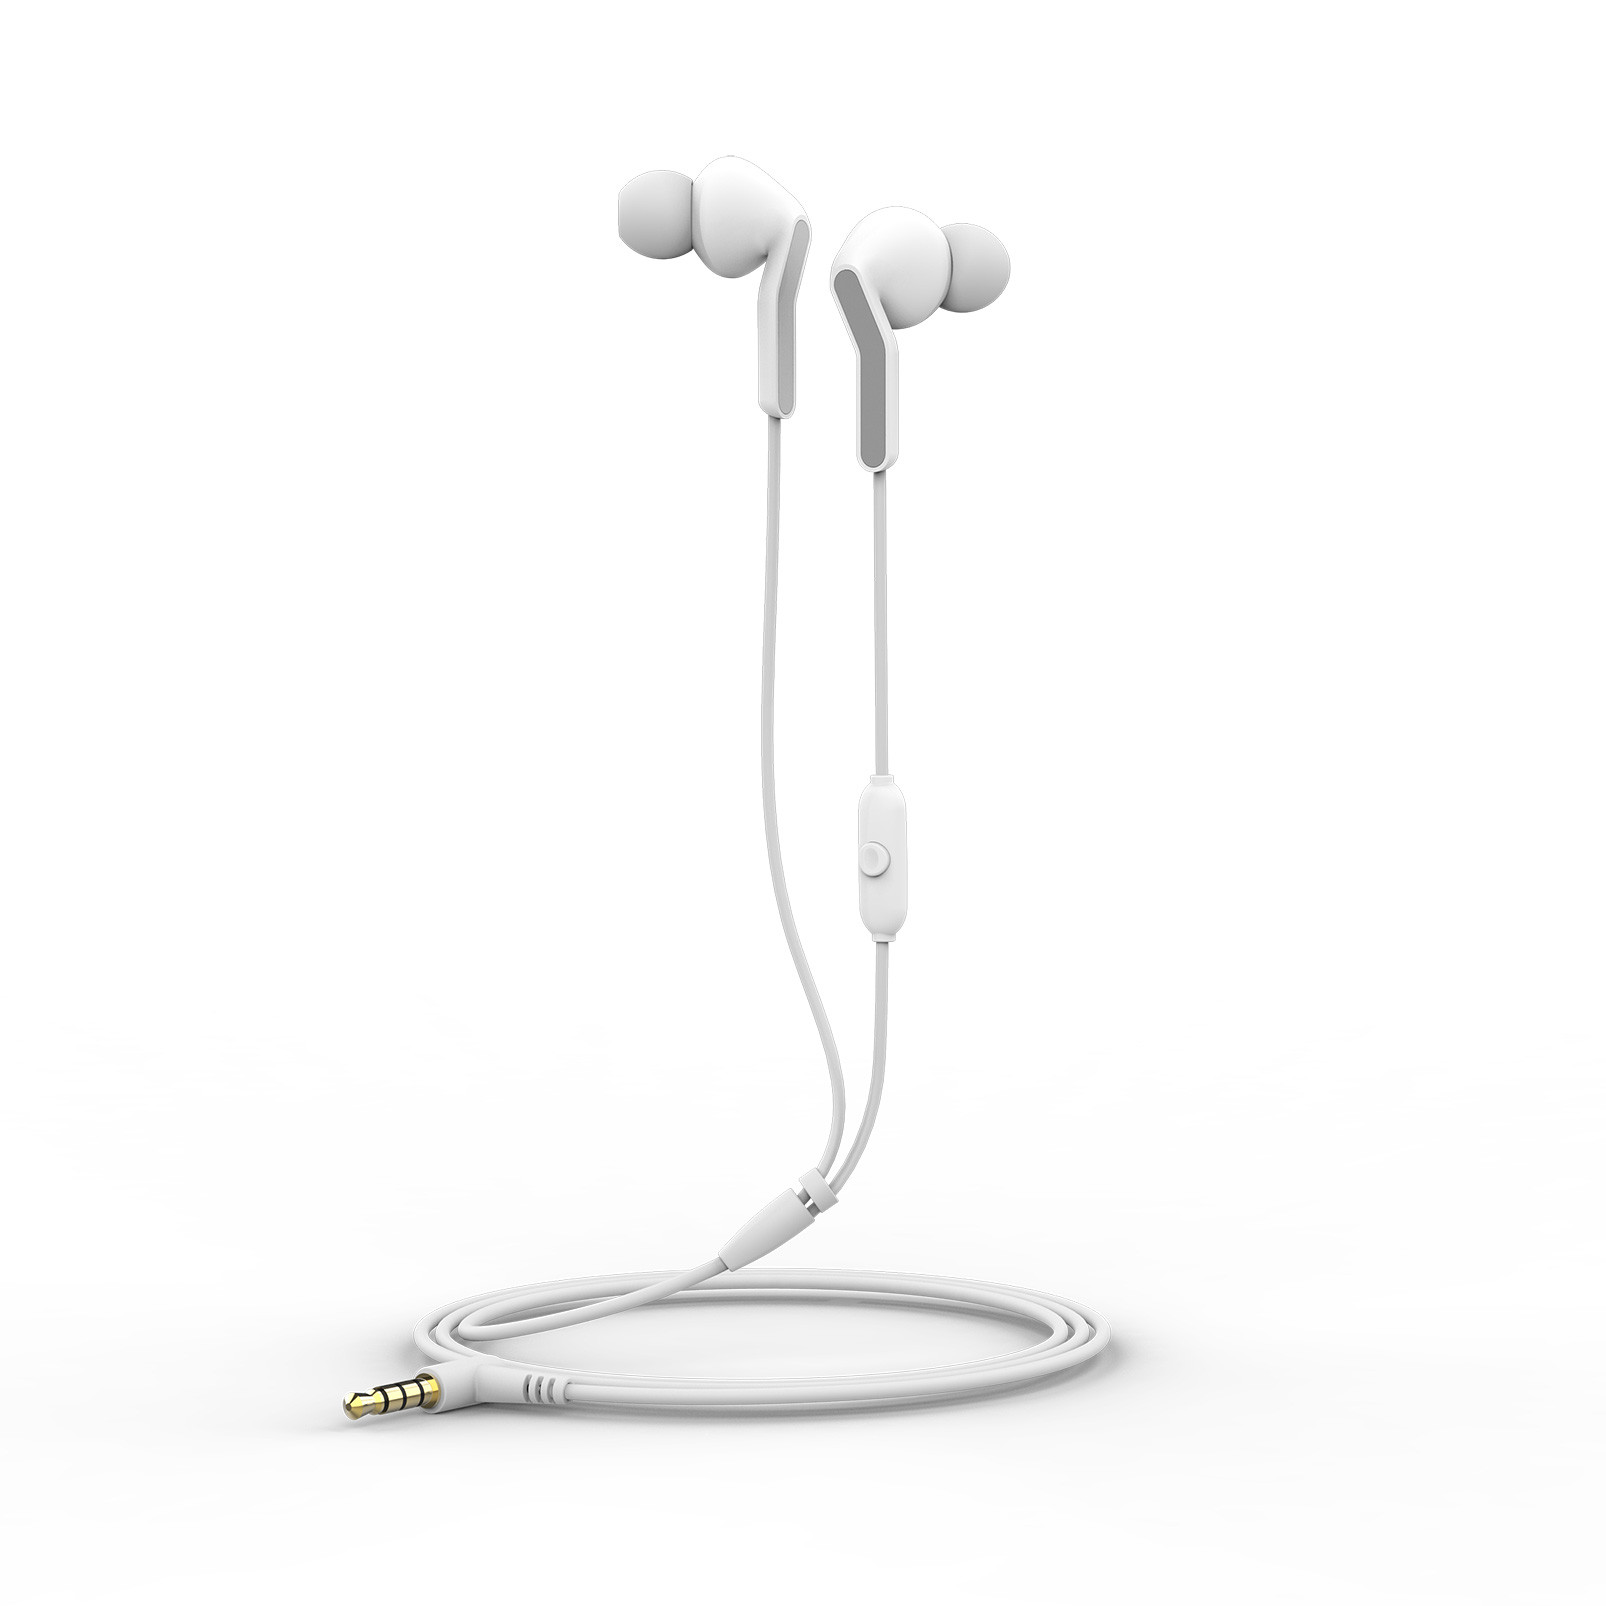 Auriculares Muvit For Change Estéreo E57 3.5mm Blancos - blanco - 